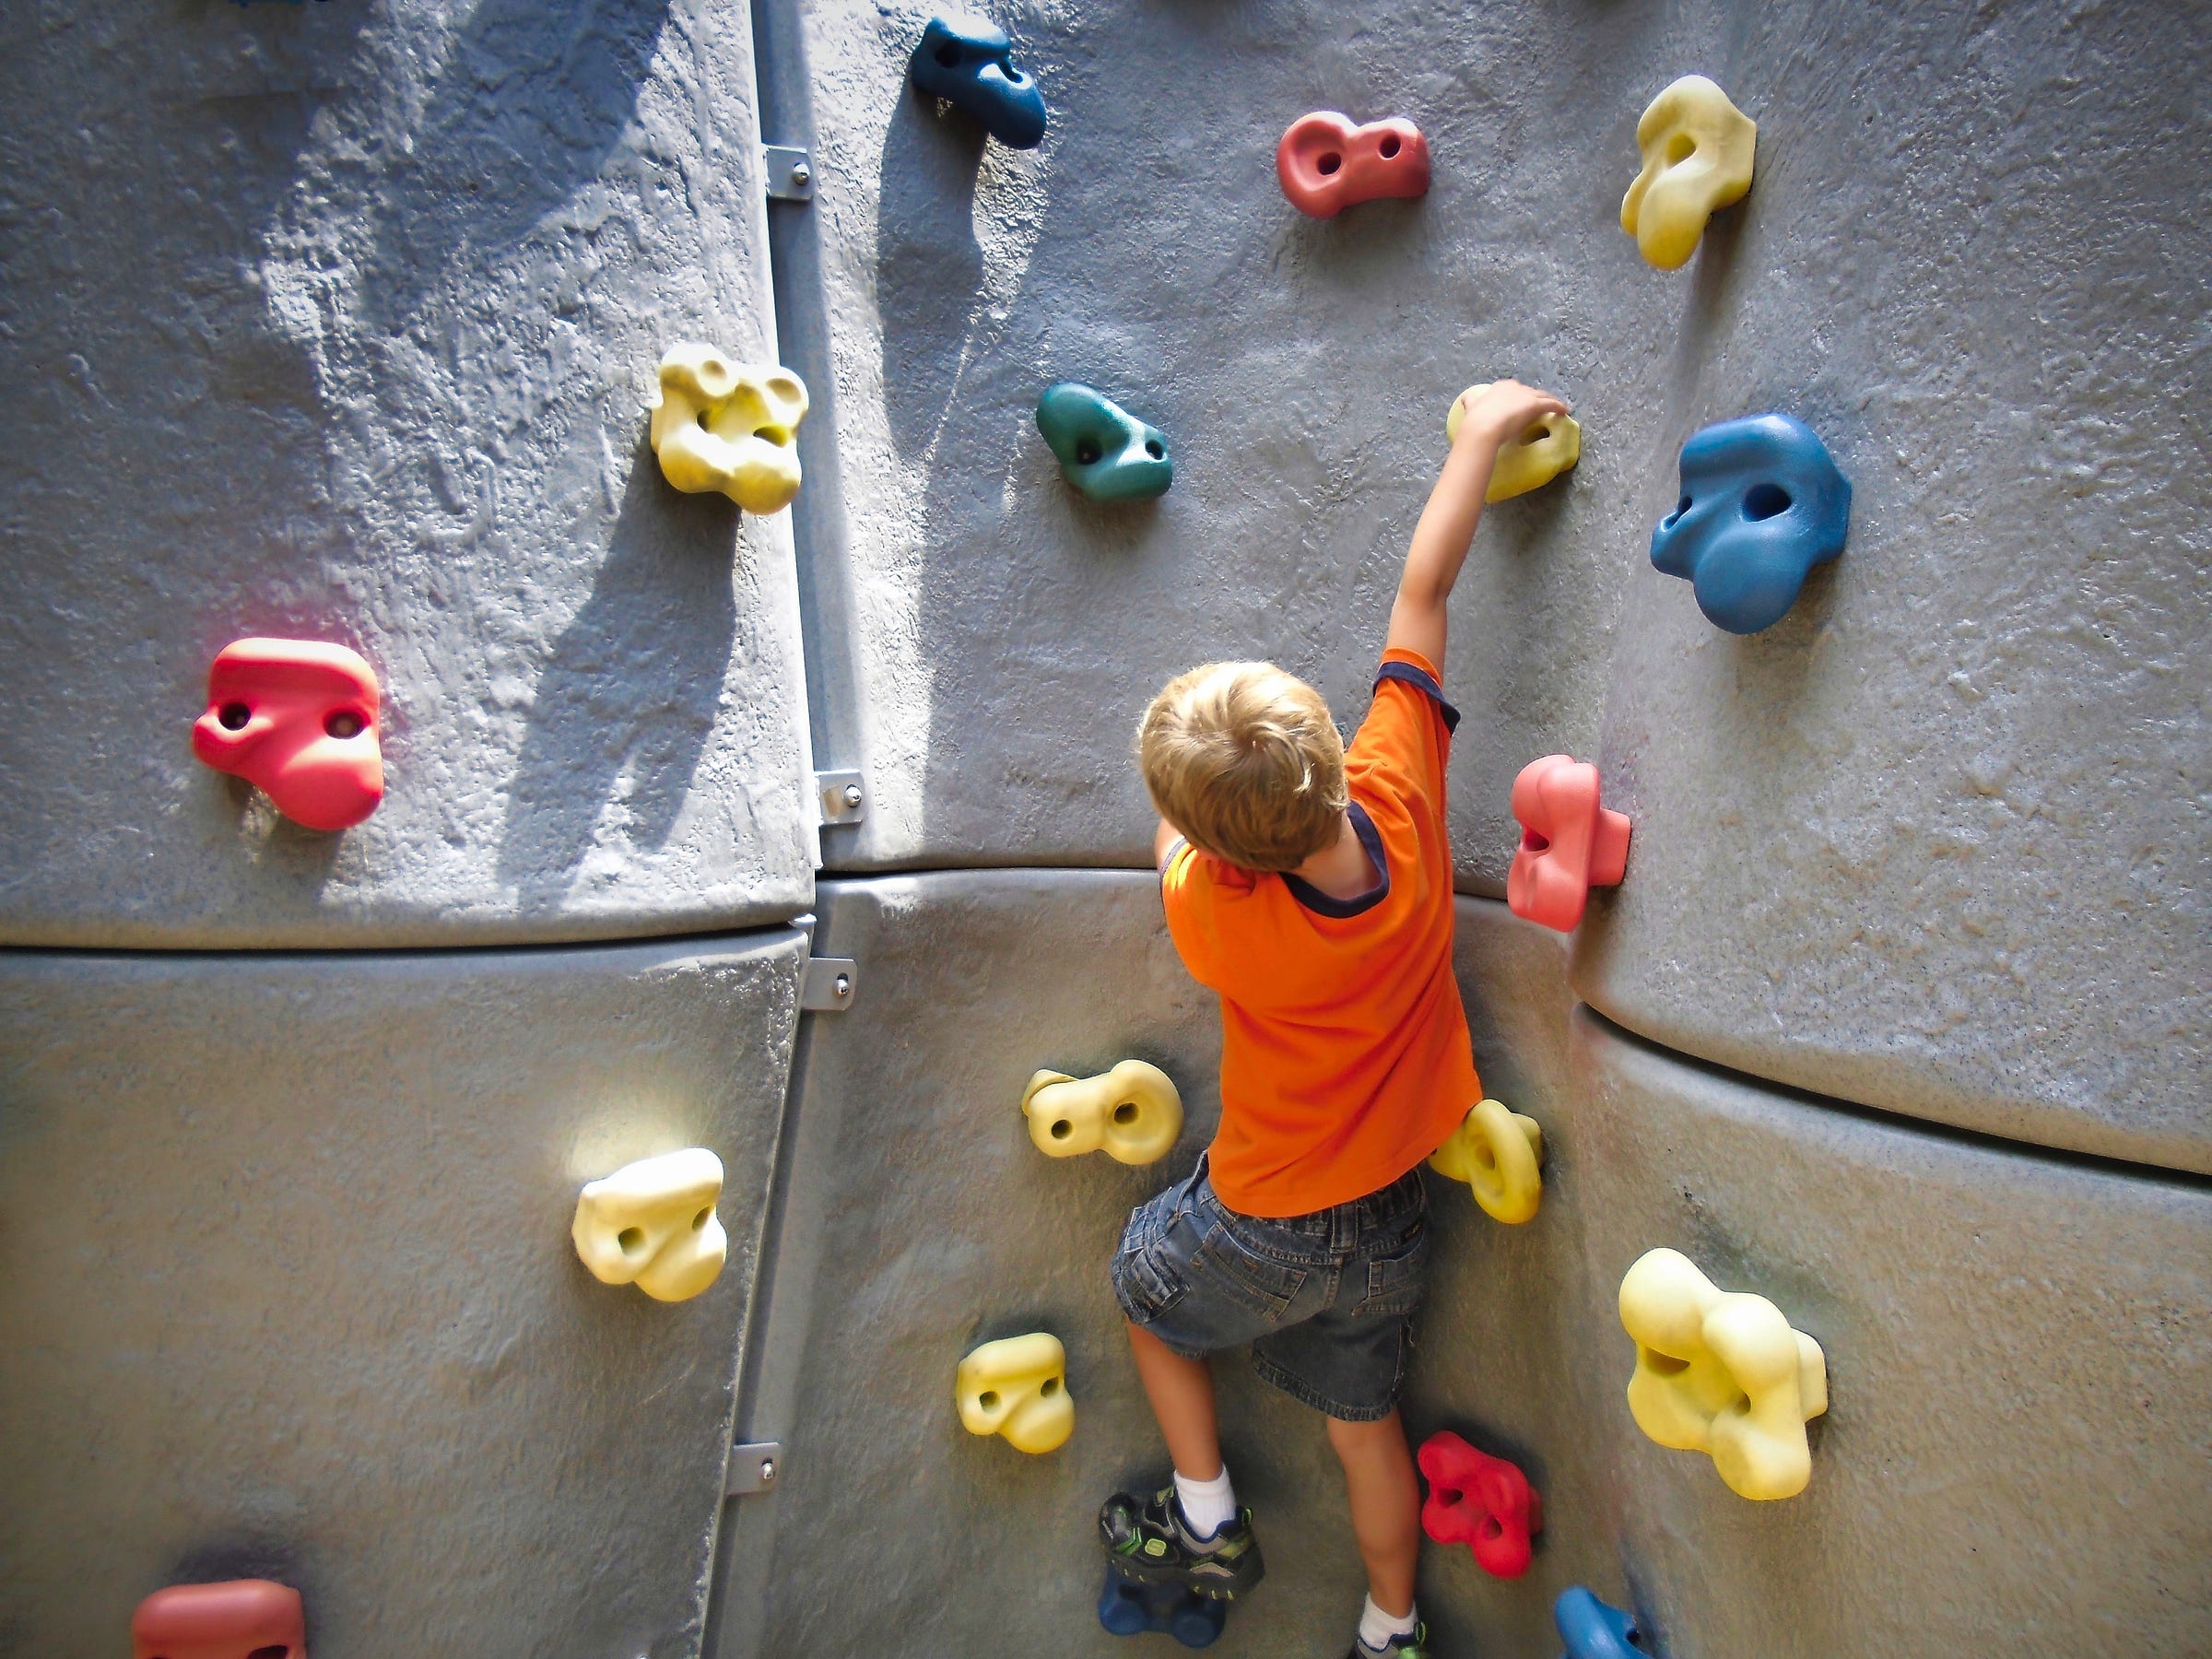 A young boy in an orange shirt and jean shorts reaching for the next grip on a rock climbing wall 